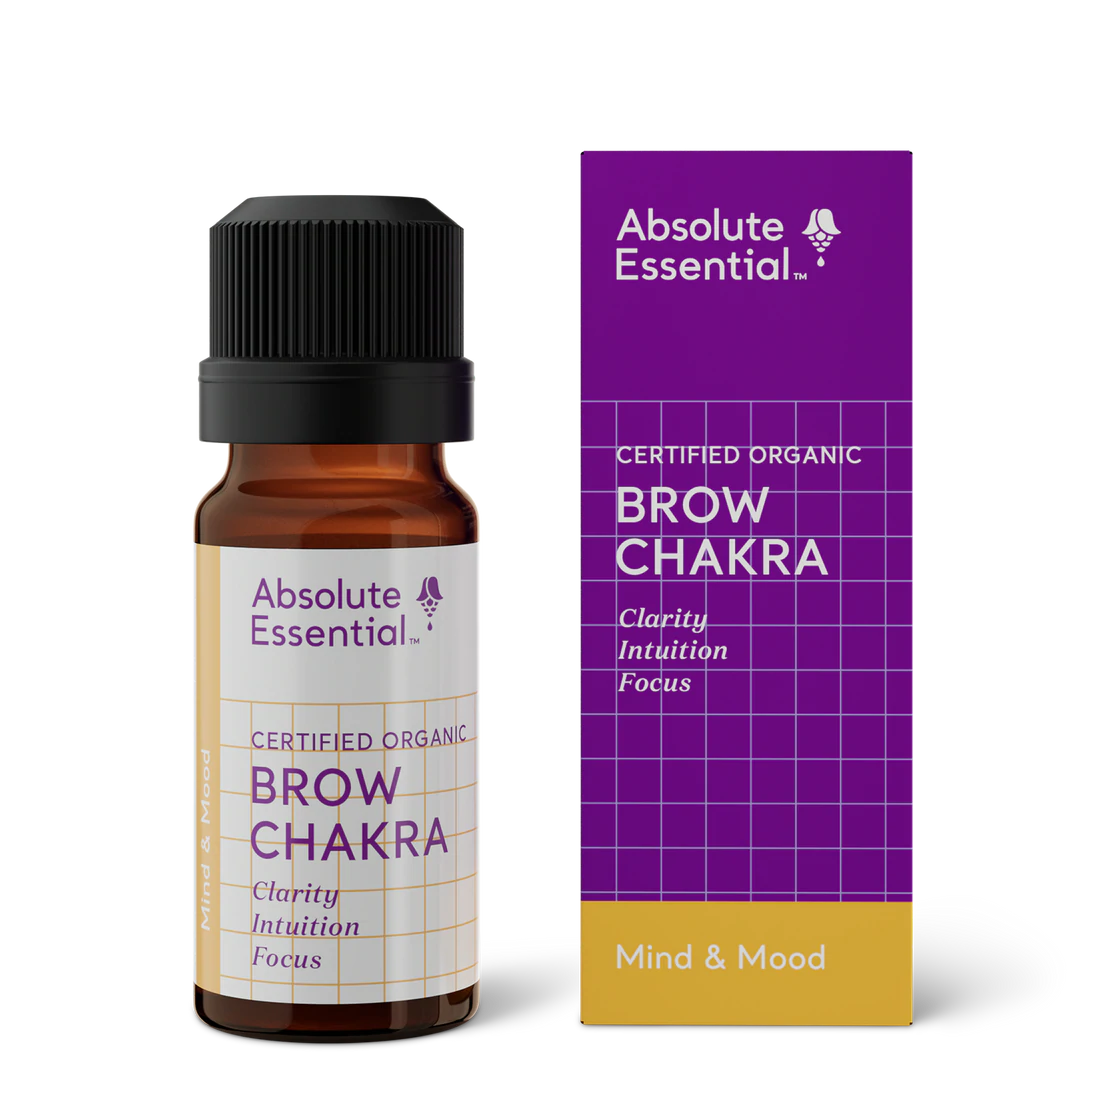 Absolute Essential Brow Chakra